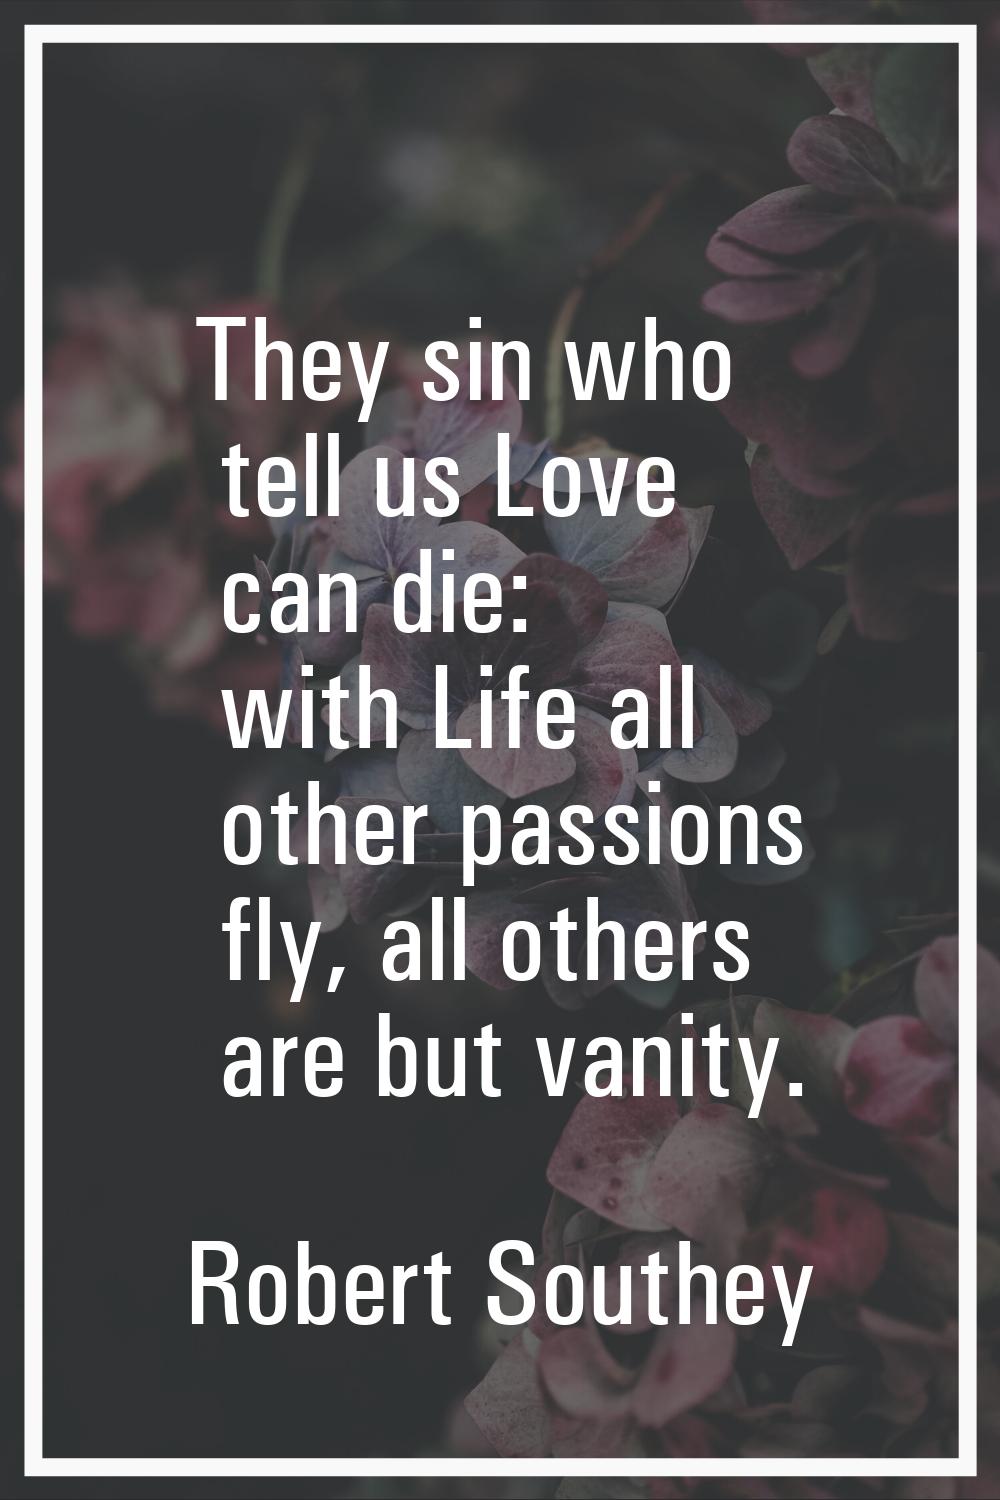 They sin who tell us Love can die: with Life all other passions fly, all others are but vanity.